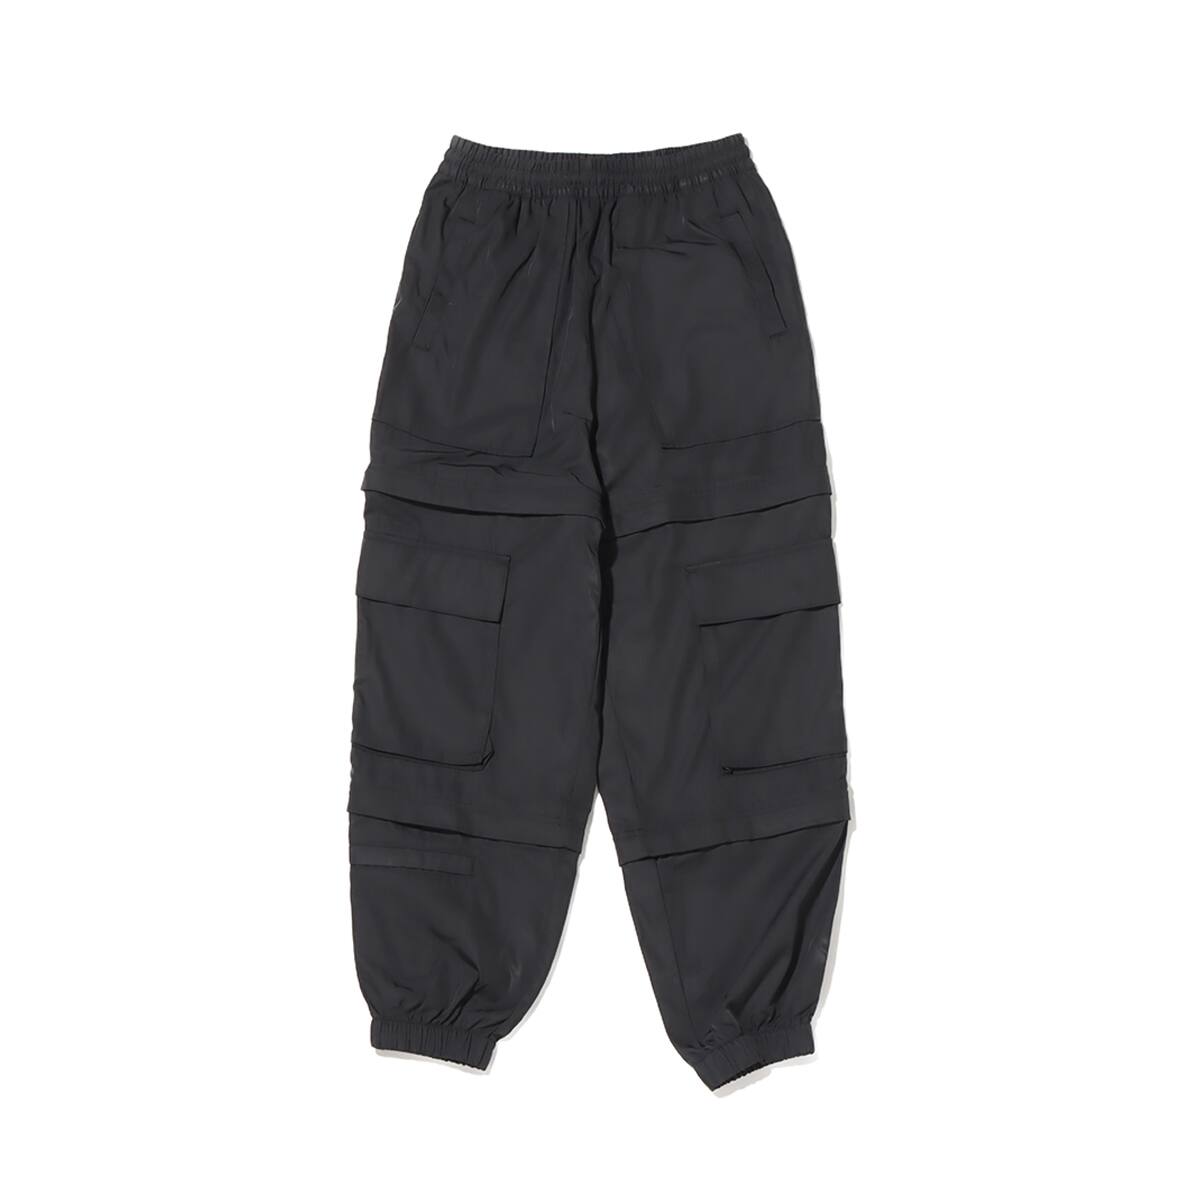 adidas IVY PARK 3IN1 PANT BLACK 23FW-S